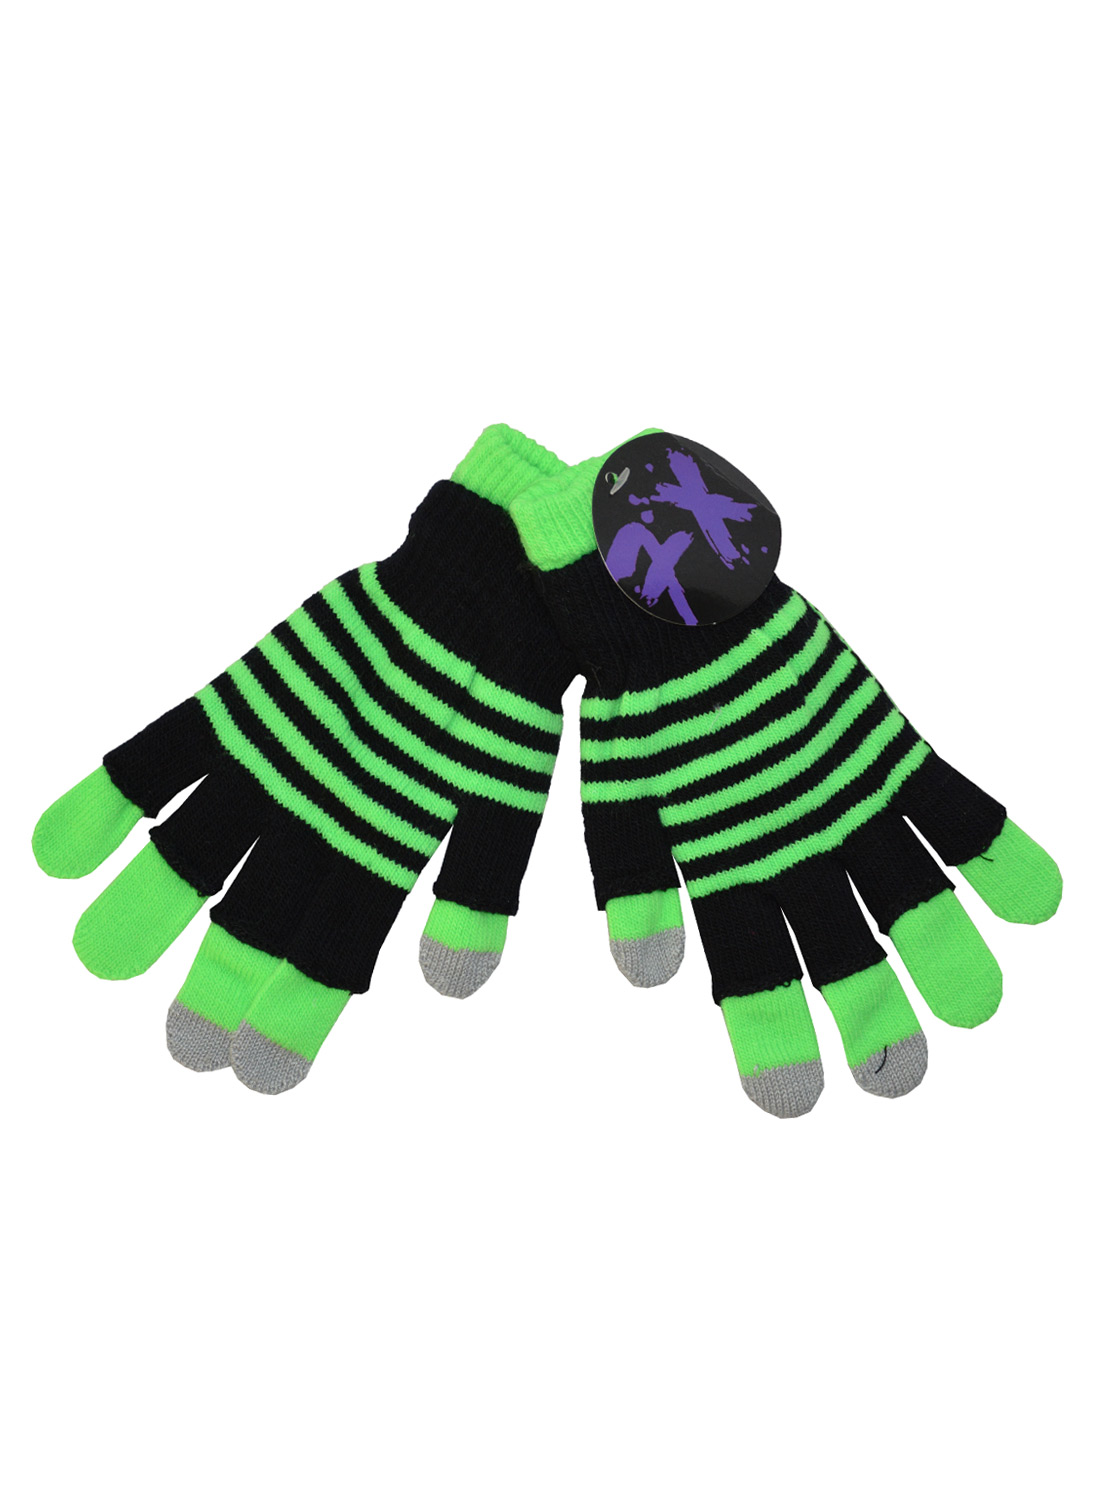 Double Black & Neon Green Striped Gloves